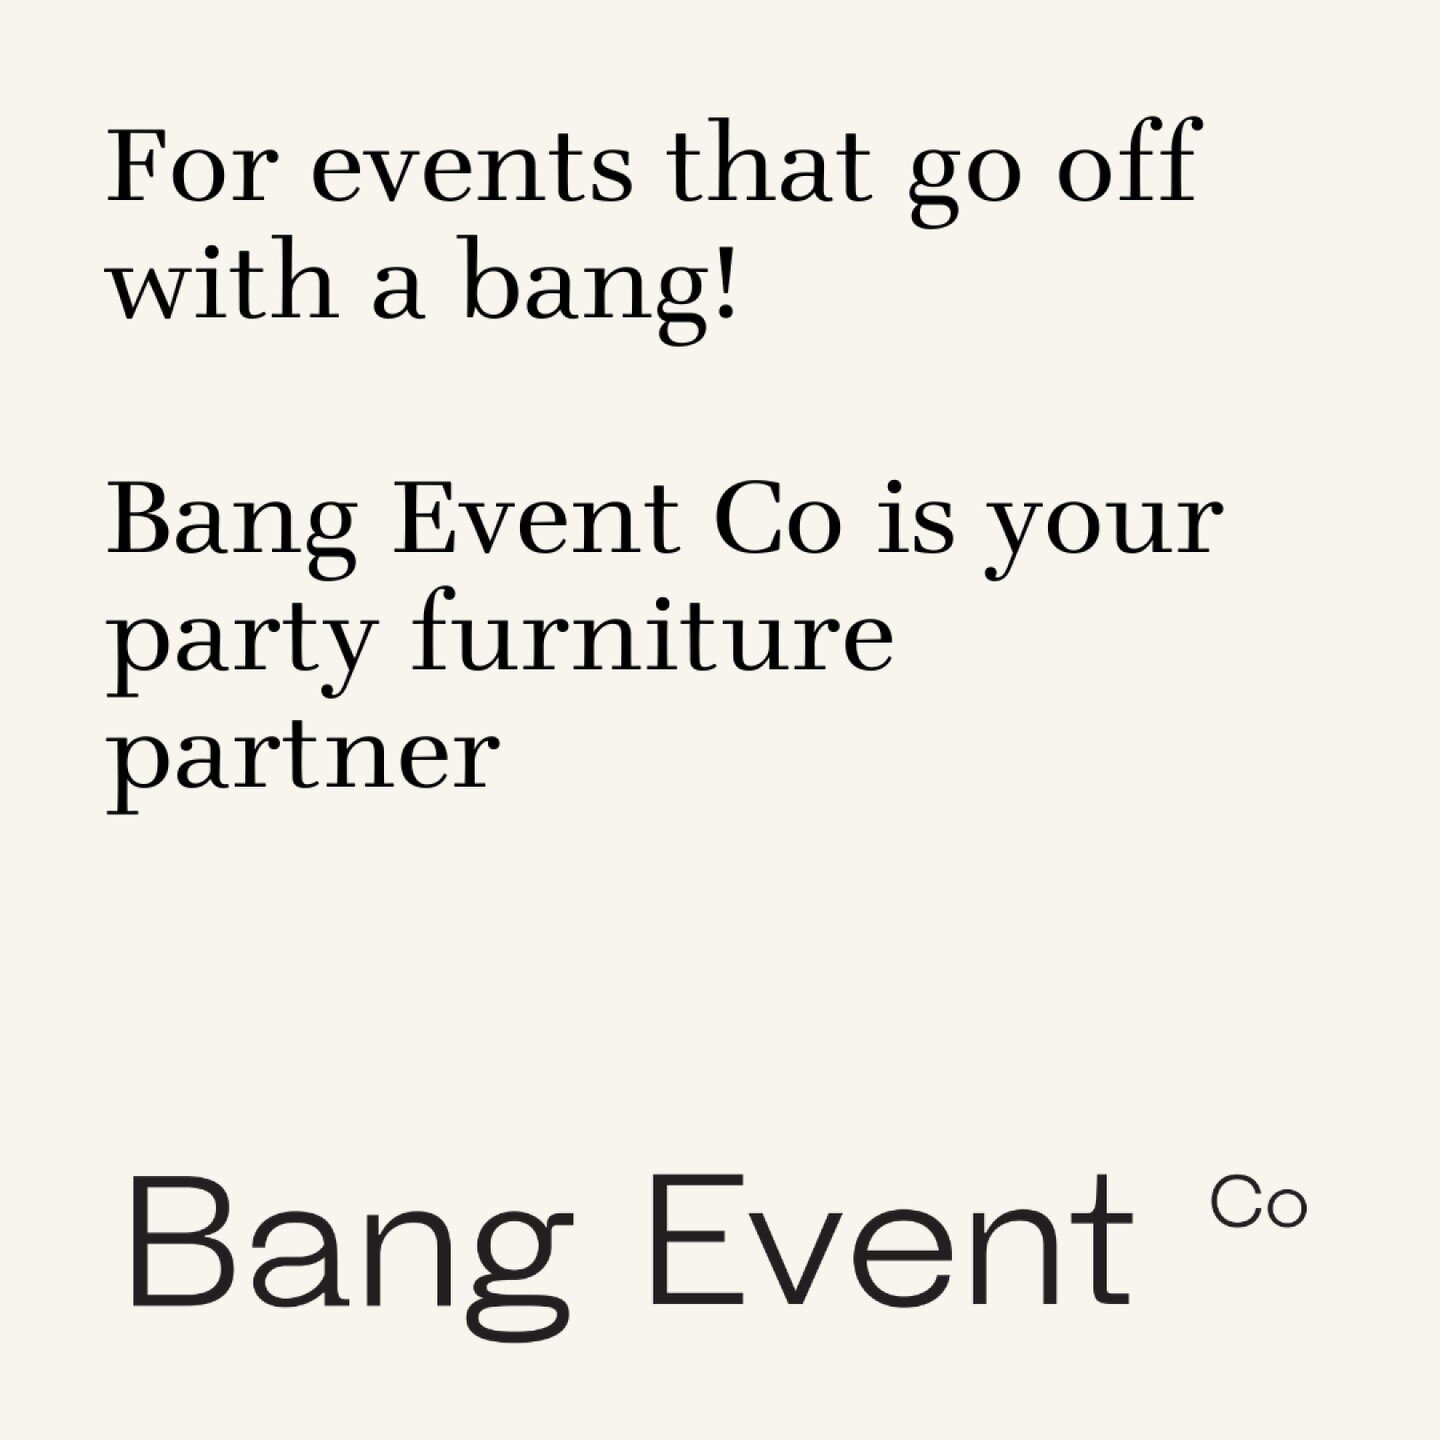 Whether you&rsquo;re planning a picturesque wedding, a corporate event or a celebration to remember &ndash; we&rsquo;re ready to set the scene.
*
*
*
*
*
#brand #bangeventco #furniturehire #eventfurniture #weddingstylist